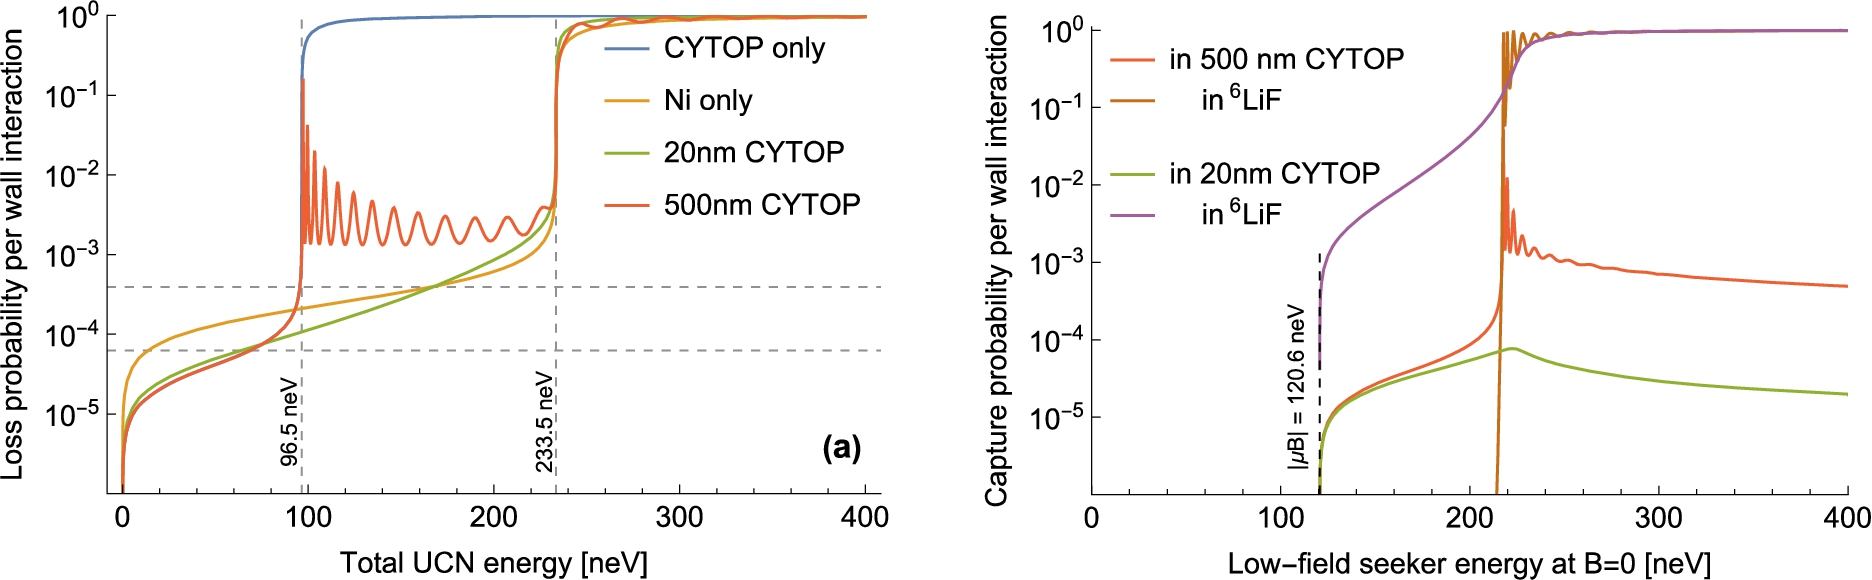 Impact on UCN loss (absorption and transmission) at normal incidence, of low-potential/low-loss surface layers (CYTOP) and magnetic field gradients. The potential energy is set to zero in superfluid helium with no magnetic field applied. (a) Without magnetic fields. For very thin (20 nm) CYTOP layers covering an infinite nickel half-space, the loss probability is substantially reduced over most of the energy range up to the nickel cutoff. For thicker layers (500 nm), a resonance structure appears for those UCN that can penetrate CYTOP but not nickel. For these energies the loss inside the CYTOP layer is substantially increased, while low loss is still preserved for the lowest UCN energies. This illustrates advantages, but also potential pitfalls, from coating a UCN storage volume with multiple layers of differing optical potential and loss parameter. (b) In the presence of a magnetic field gradient producing a 2 T field at the wall surface, the cutoff energies are shifted by the 120.6 neV interaction potential (shown for low-field seekers only). Here the infinite half-space underneath the CYTOP coating is highly absorbing 6LiF, and the absorption probabilities are separately shown for the CYTOP layer and this substrate. For a certain energy range, jointly determined by the layer thickness and magnetic field, low-field seeking UCN can be efficiently absorbed underneath the CYTOP. For lower UCN energies the loss probability remains low.